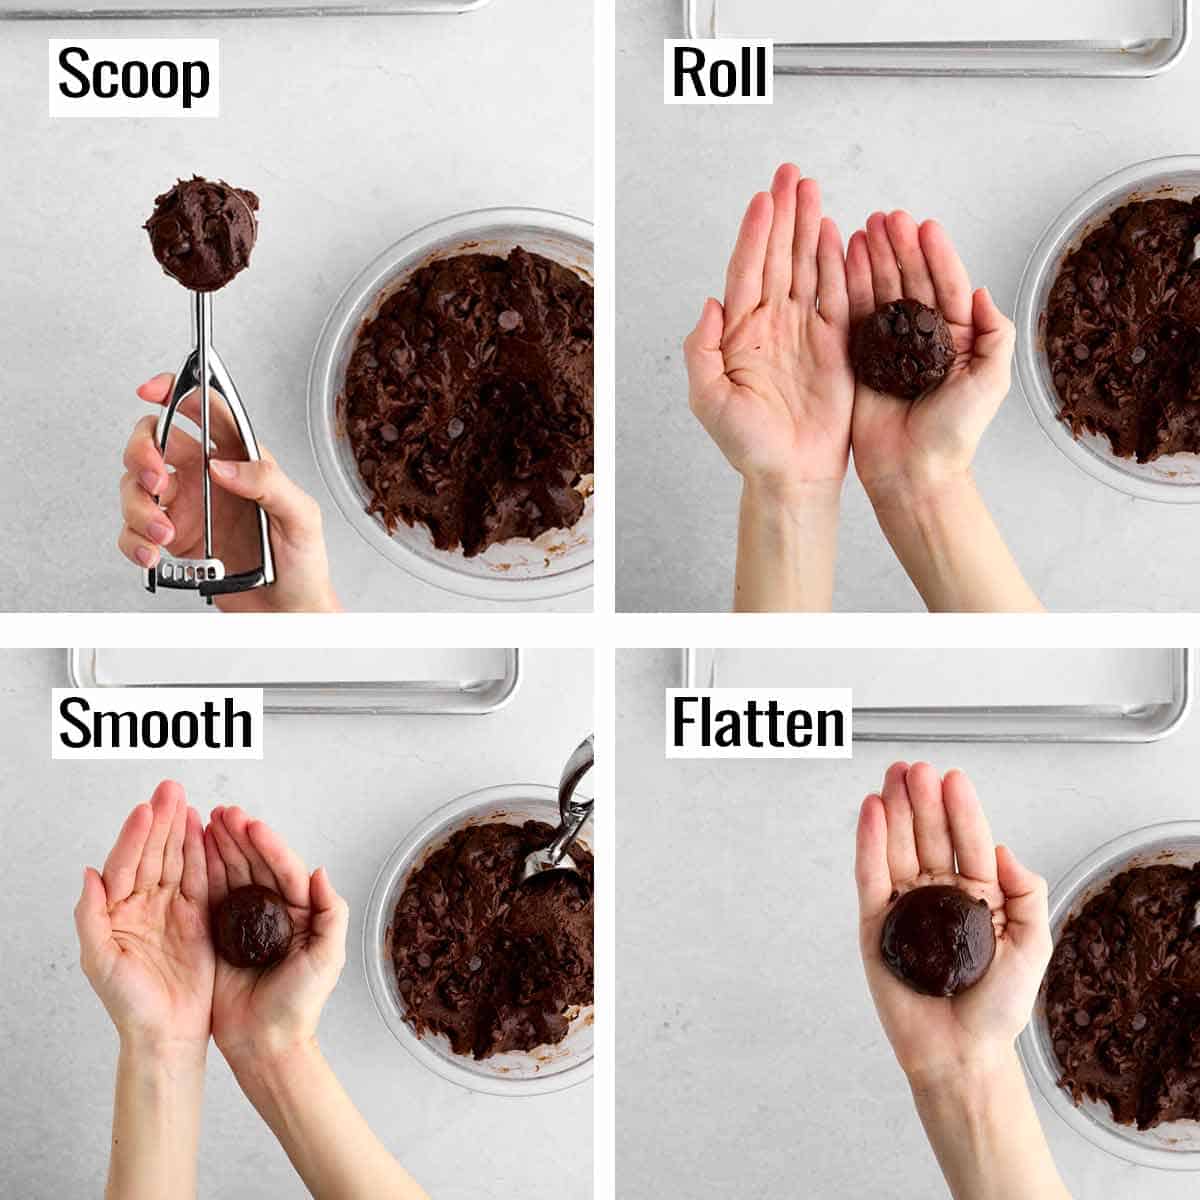 Step-by-step showing scooping the cookie dough, rolling it smooth, and flattening it before baking.